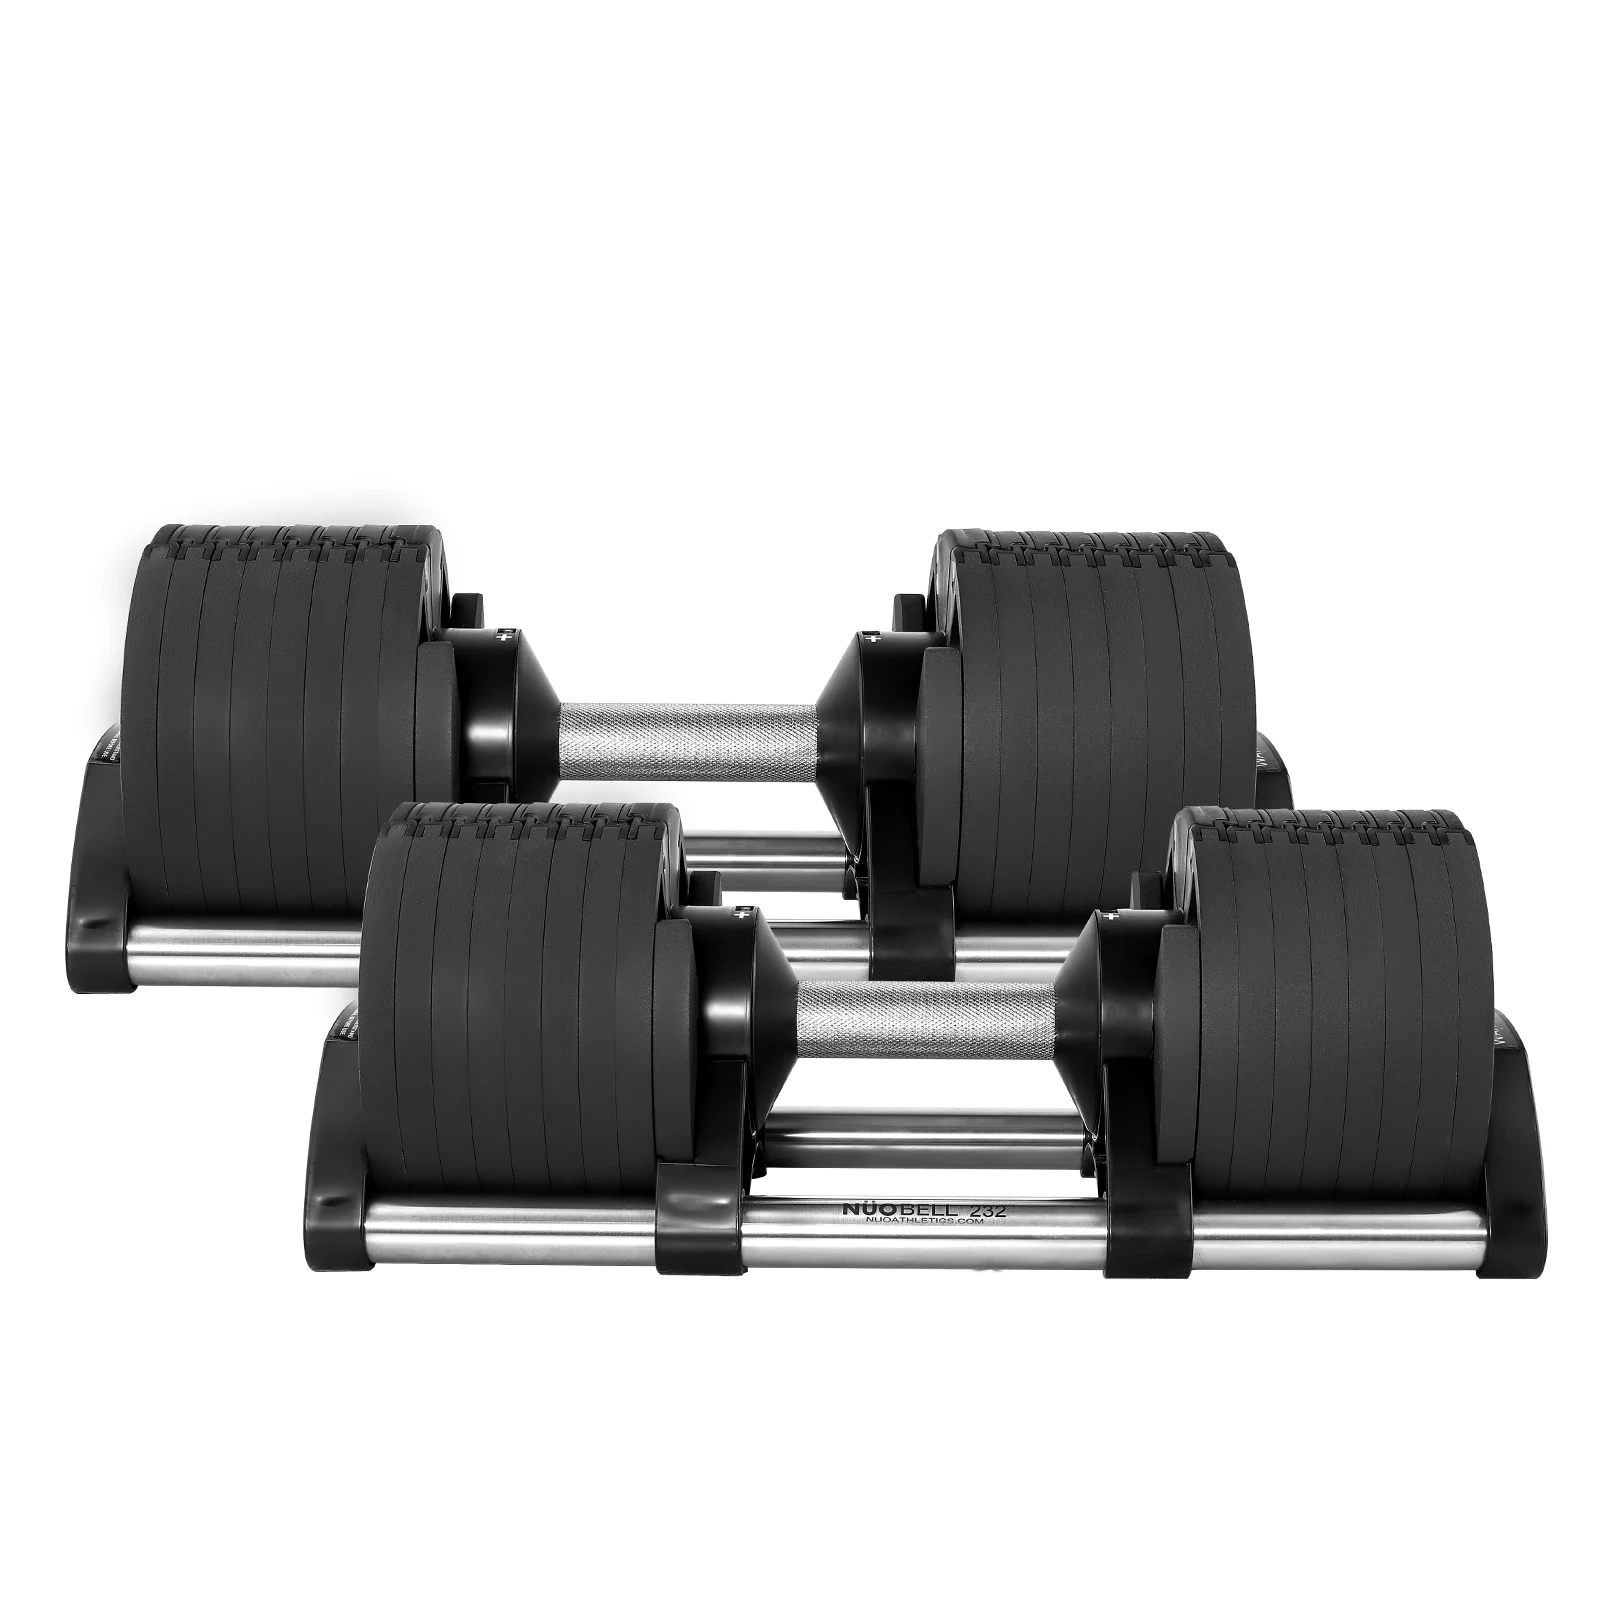 

Cheap Shipping Cast Iron Dumbbell Nuo Nuobell Adjustable Dumbbell 80 lbs, Black